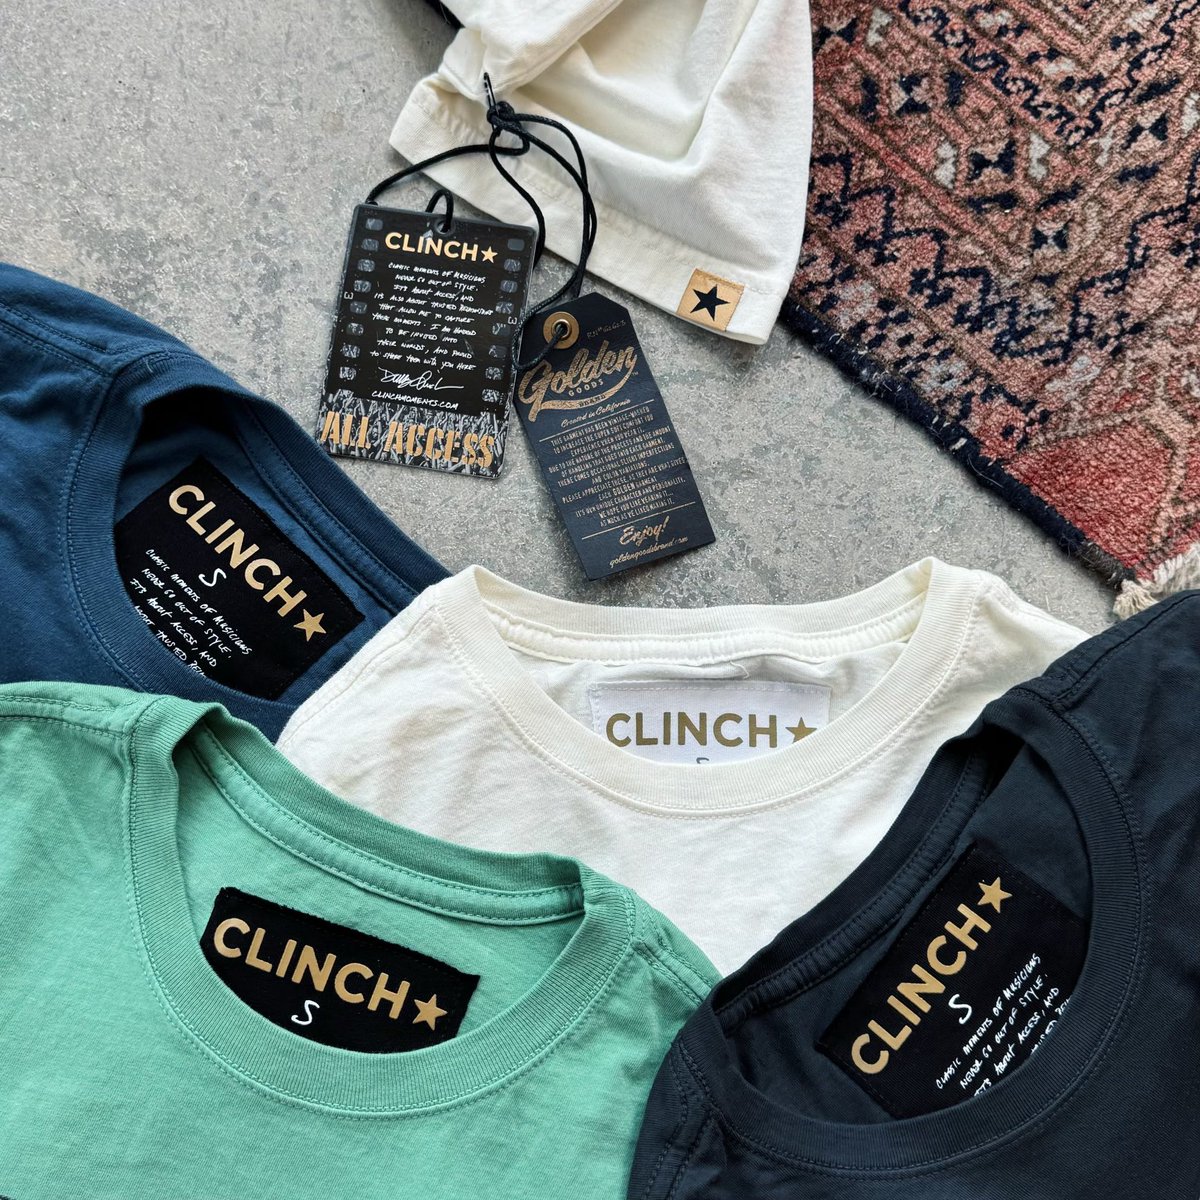 We heard your recommendations and we’re excited to launch the newest Clinch Collections drop later this week!! 👀👀 Sign up for the email list on our website to get priority access to the new collection on Thursday before it goes on-sale to the public on Friday.